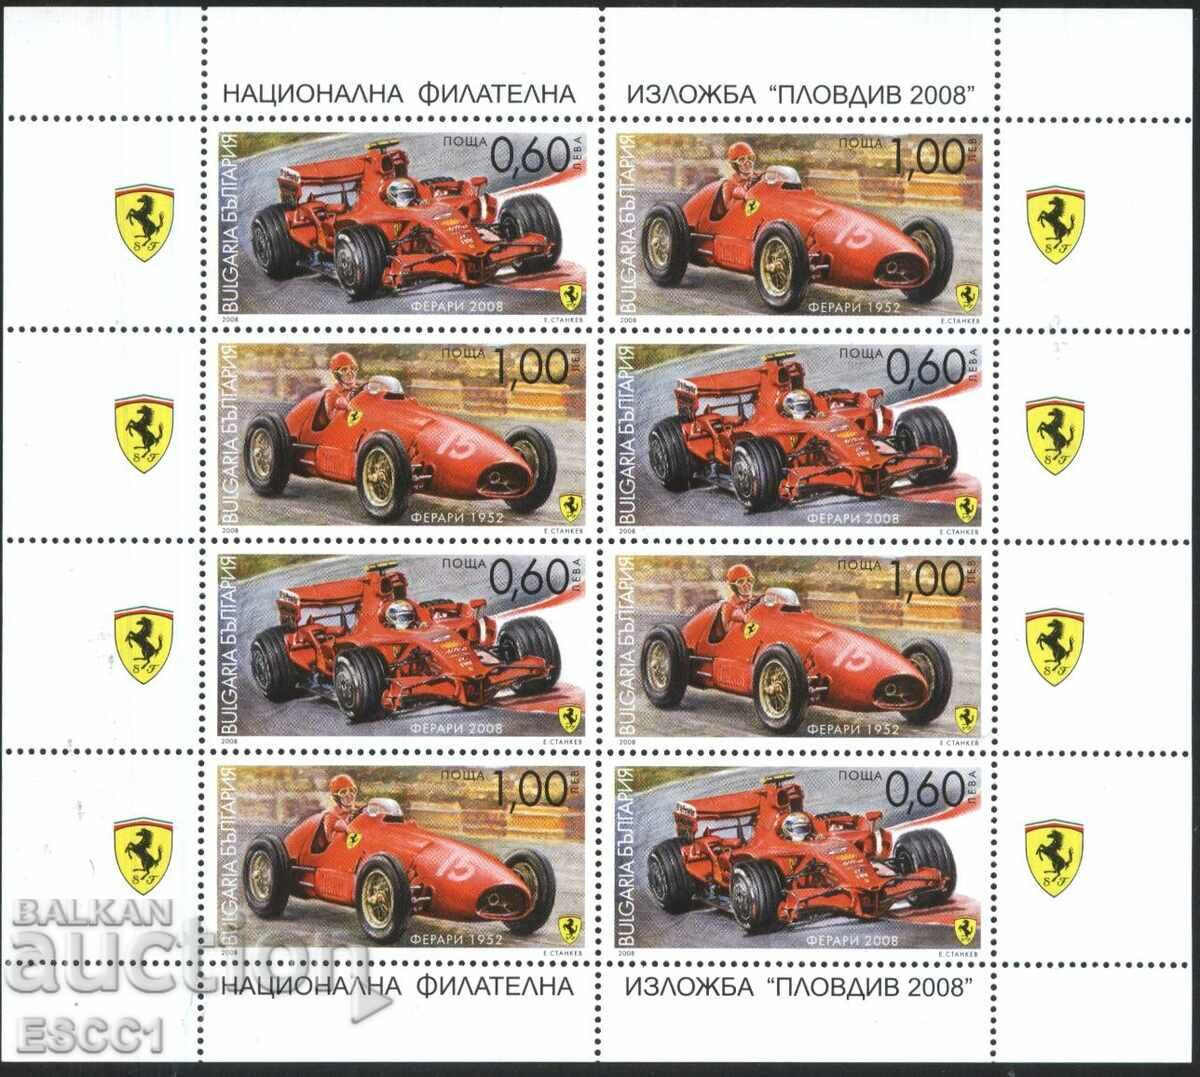 Clean stamps in a small sheet Ferrari 2008 cars from Bulgaria